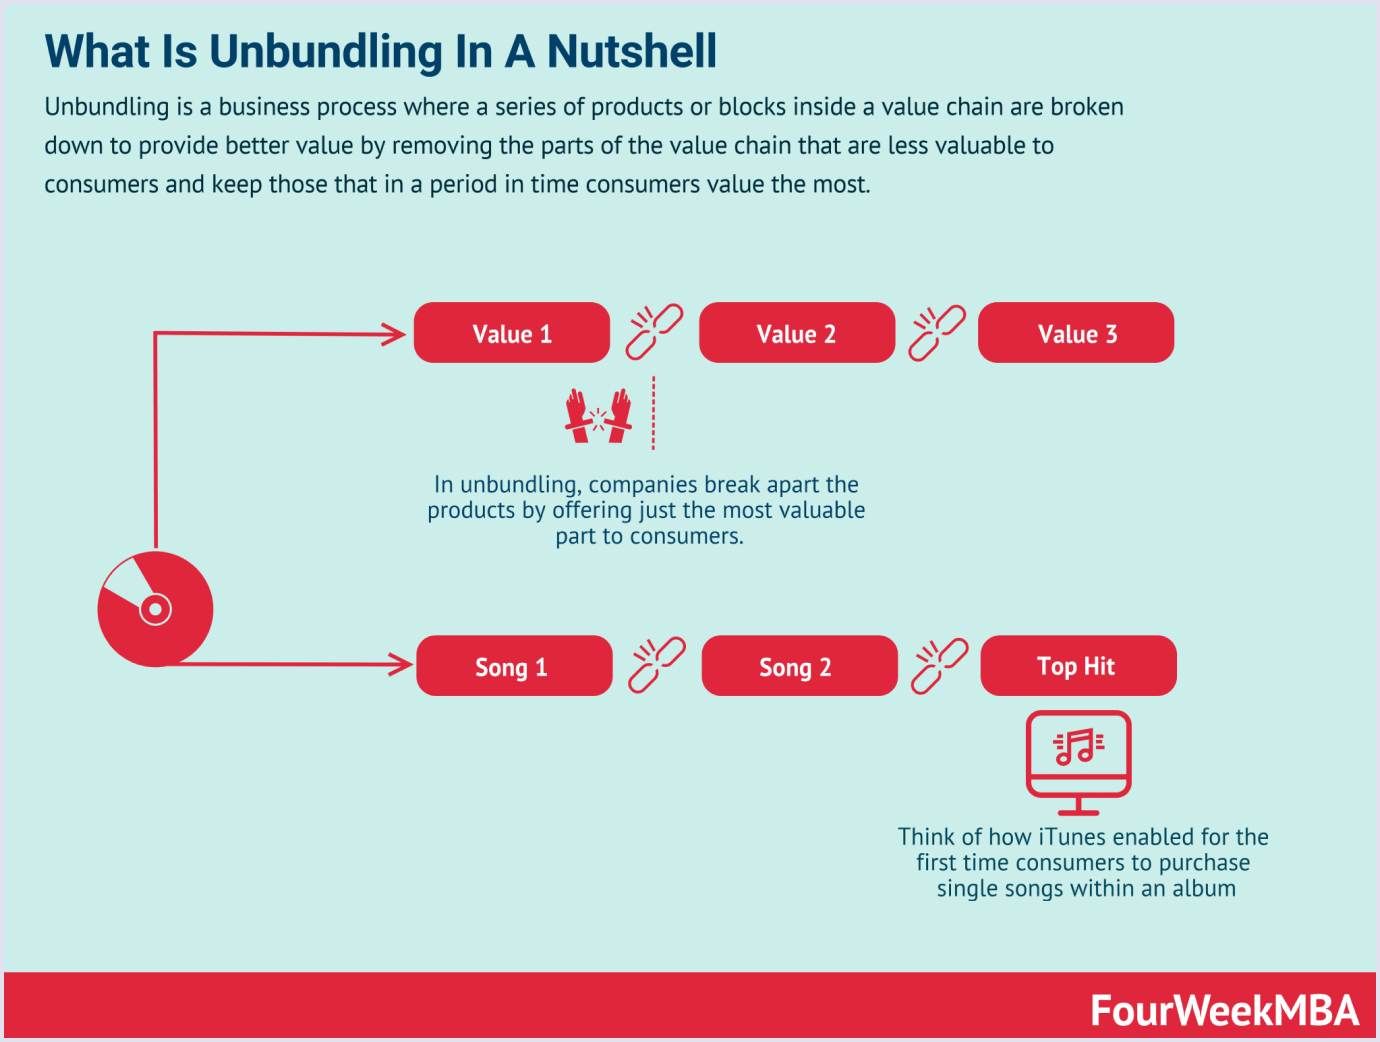 Example of unbundling as one of the future technologies Saas